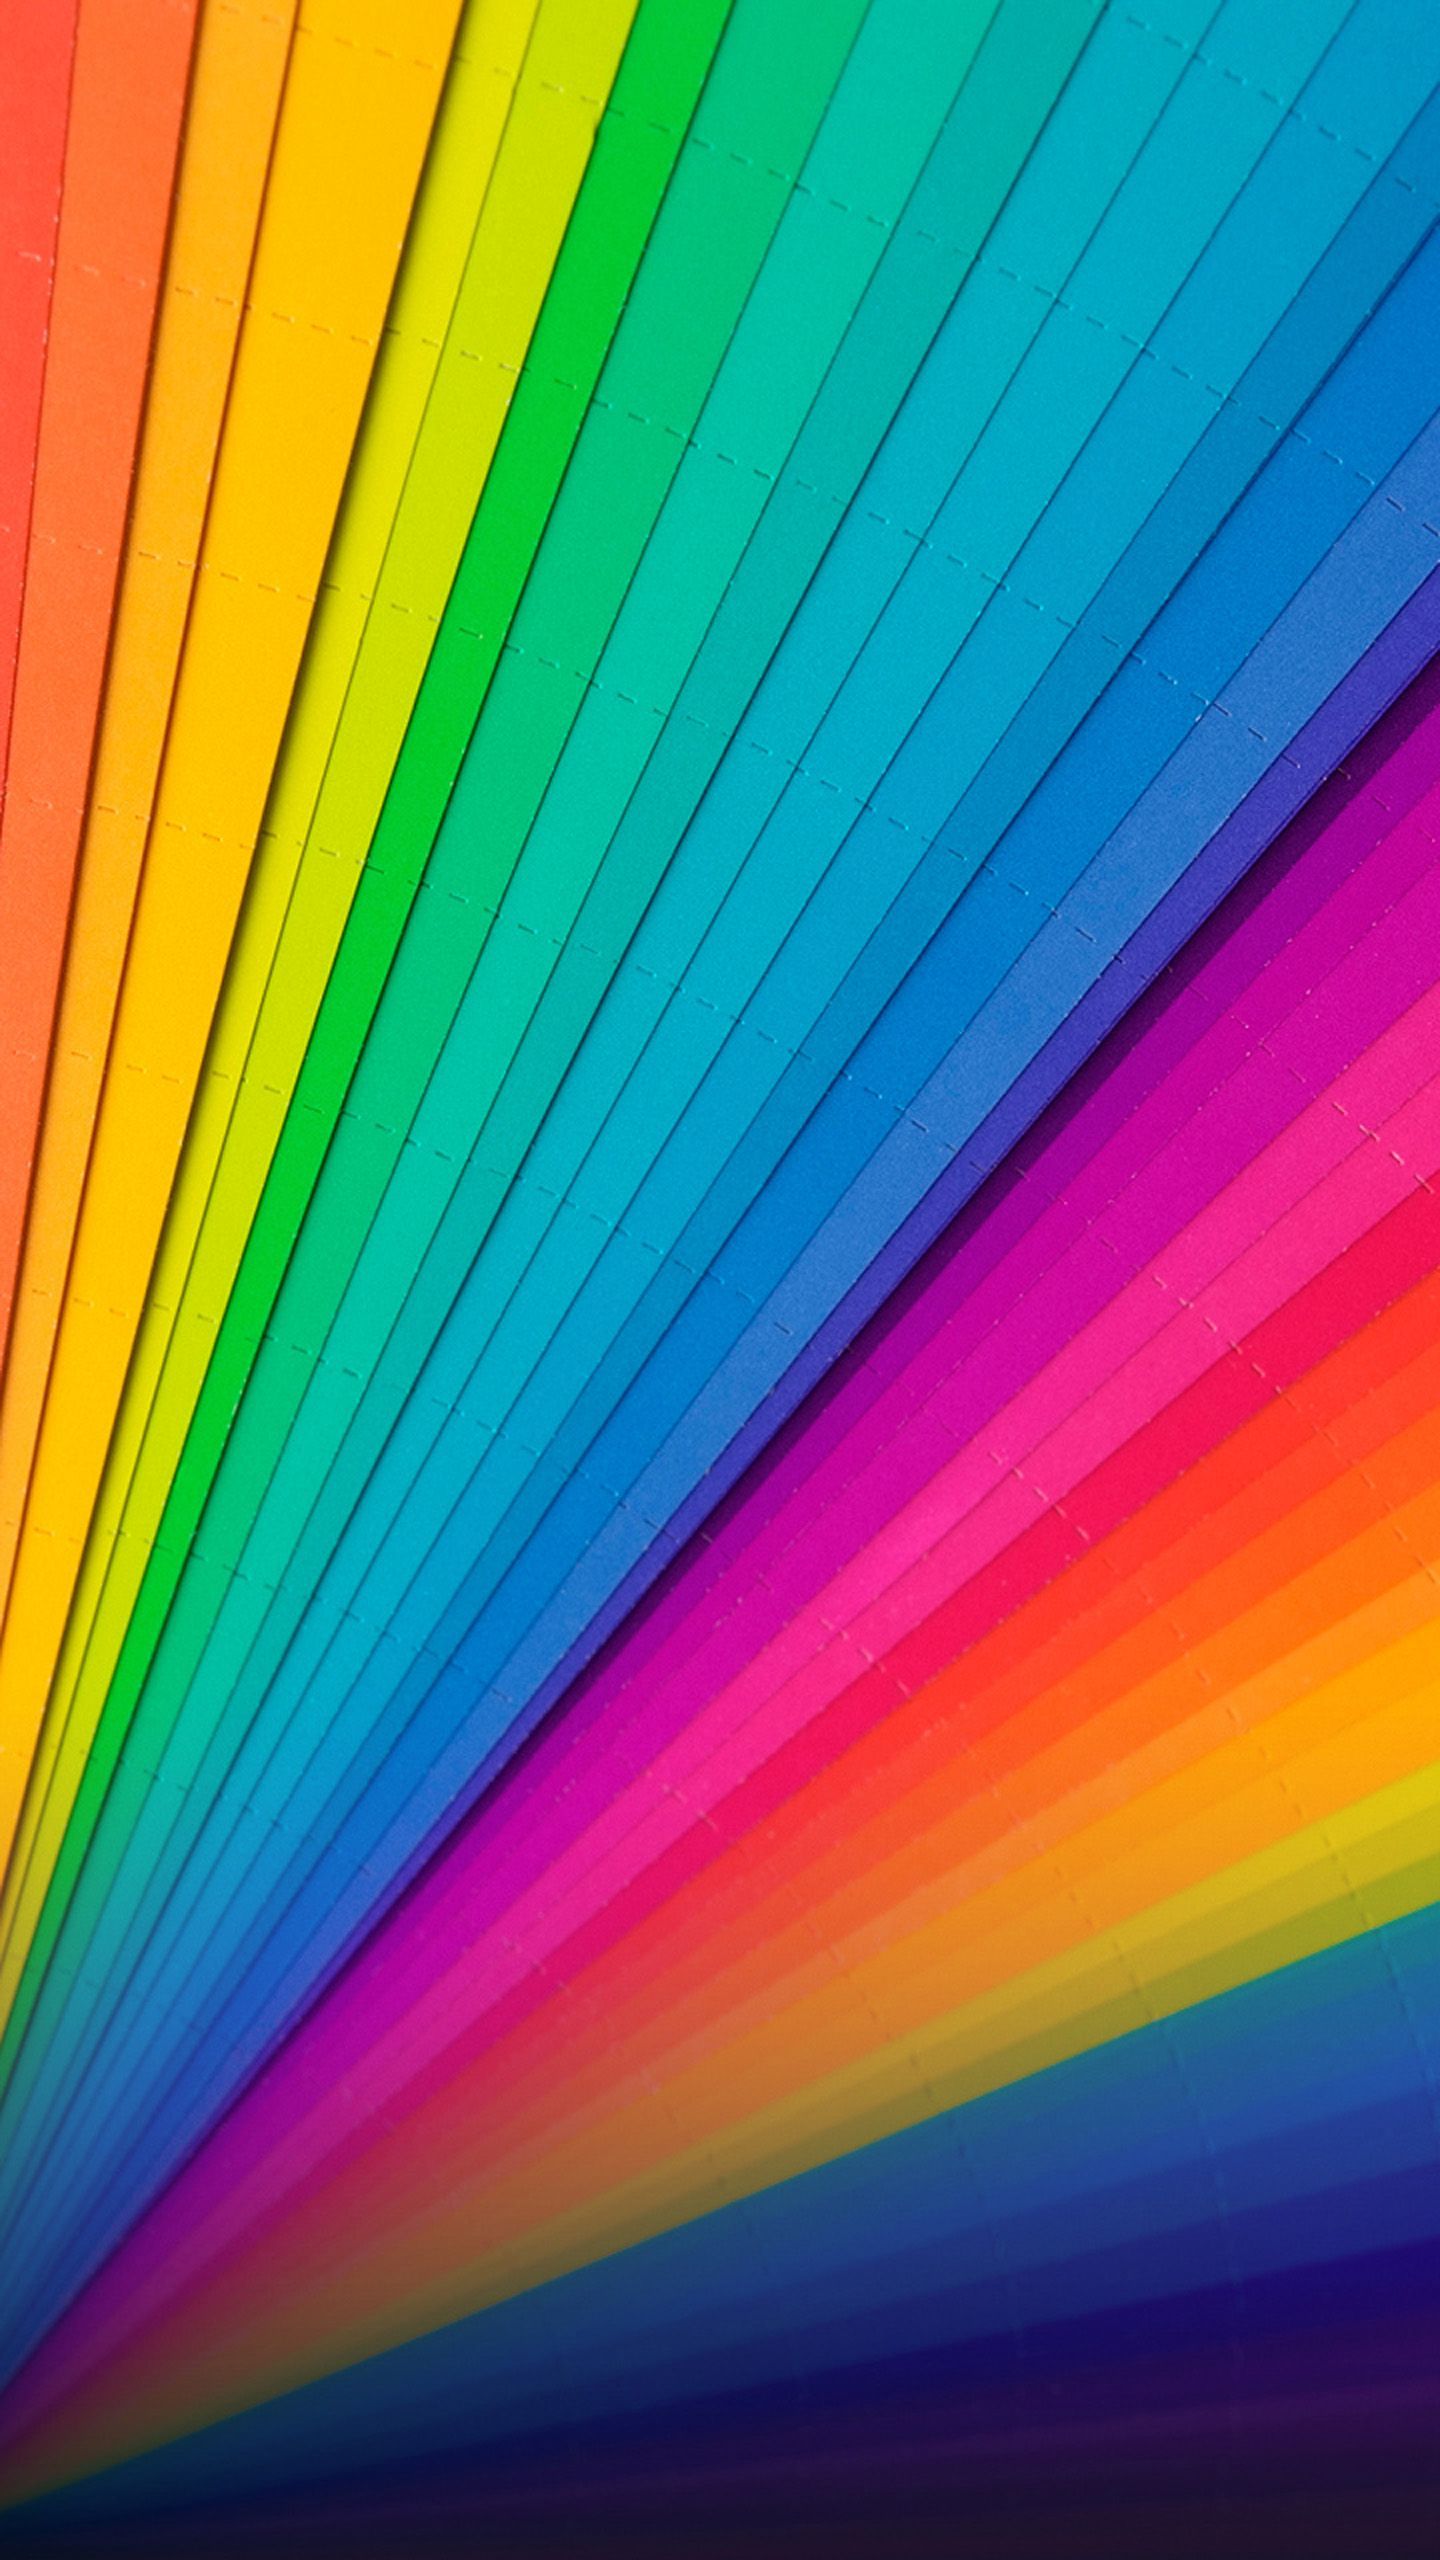 Colourful Background for Phone. iPhone Wallpaper, Phone Wallpaper and Beautiful iPhone Wallpaper